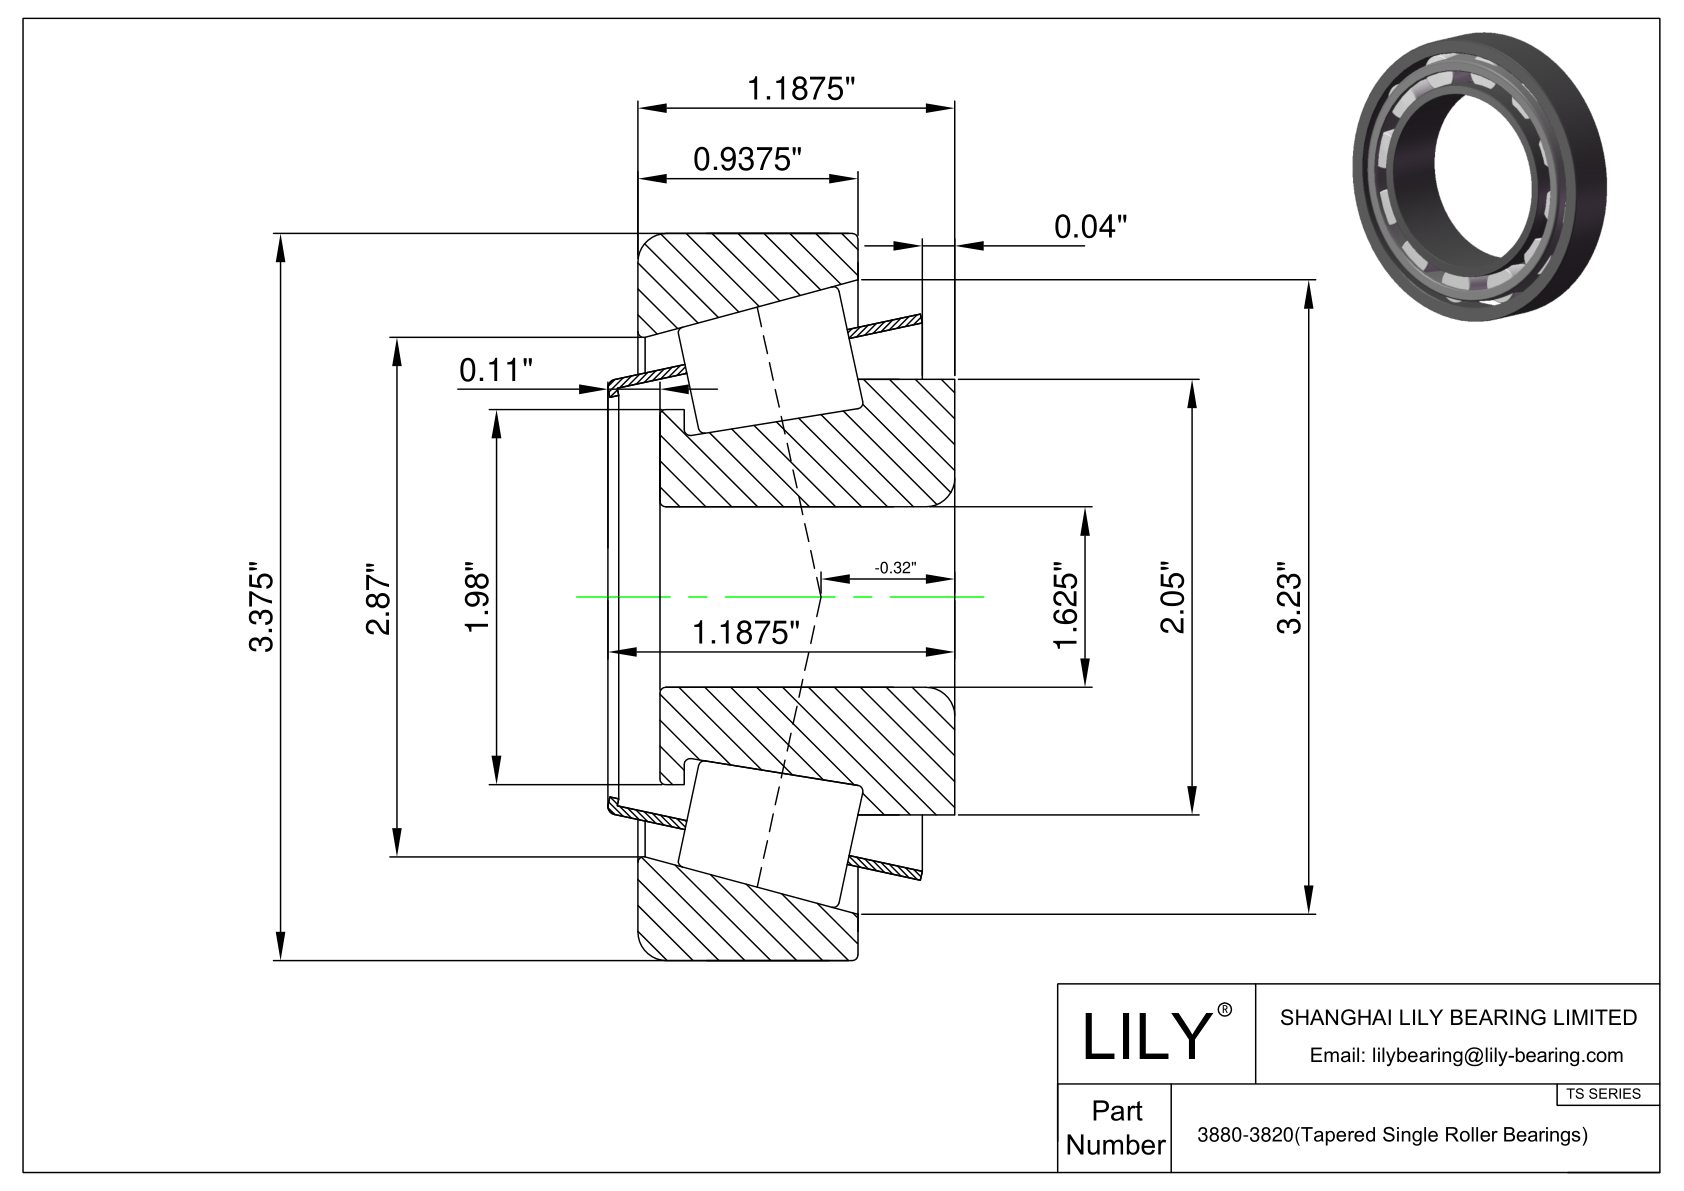 3880-3820 TS (Tapered Single Roller Bearings) (Imperial) cad drawing